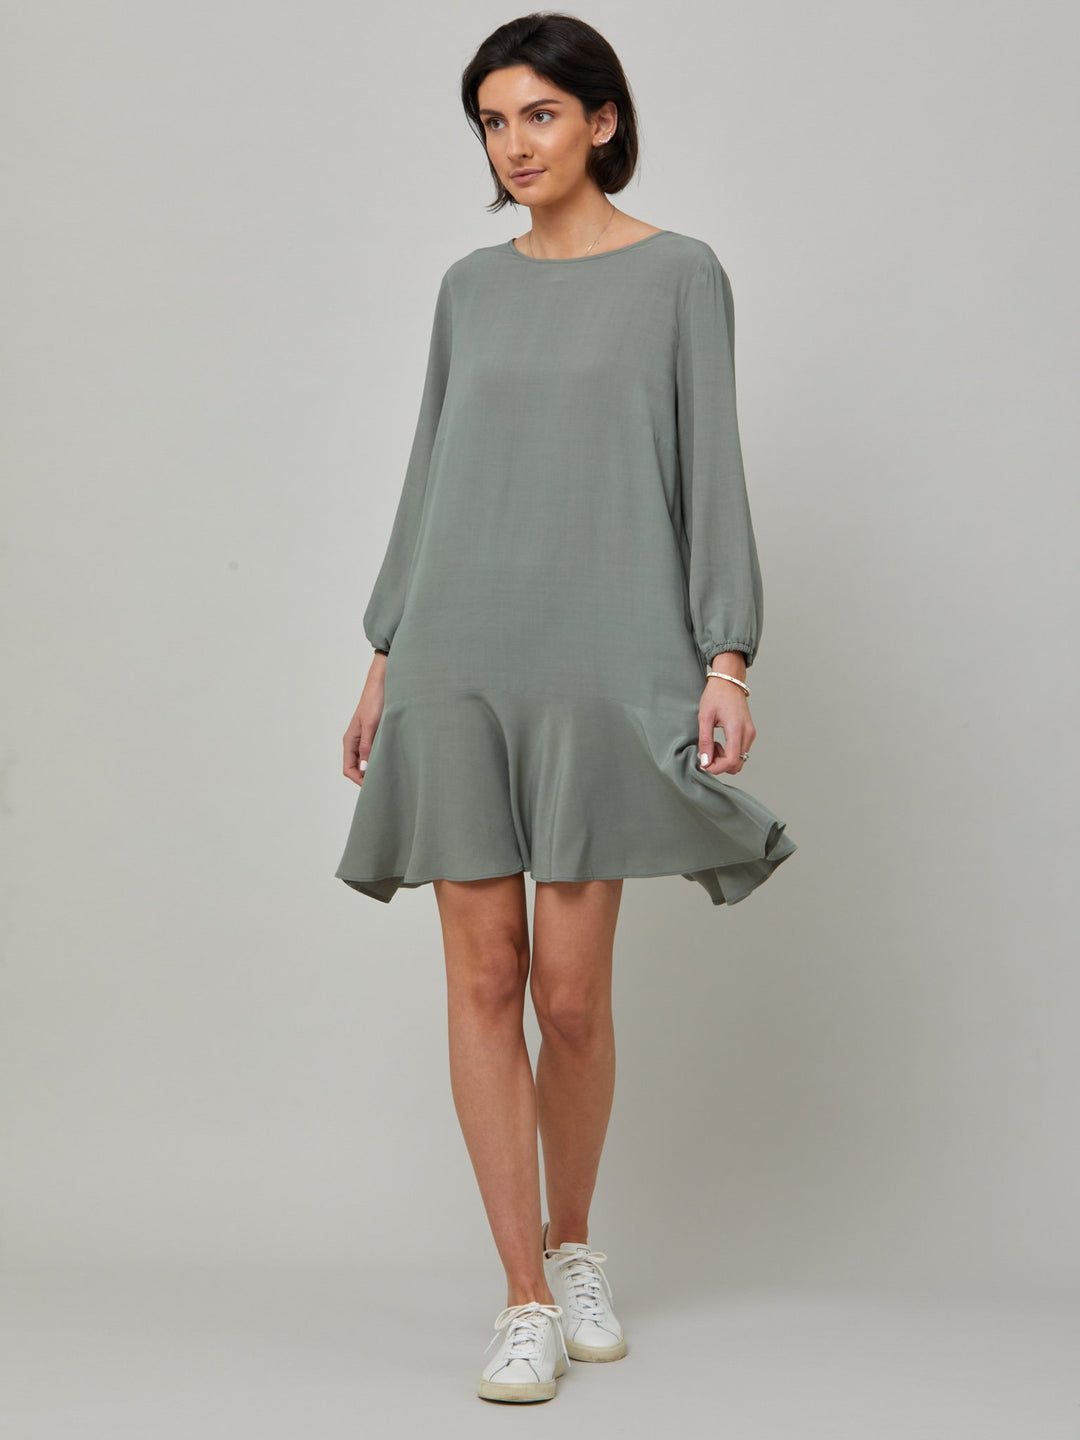 Sheila, a great everyday dress. Crafted in our fluid lichen green viscose crepe. A flirty knee-grazing shift dress with a soft elasticated cuff sleeve that falls to a deep frill hem with a jewel neckline and key-hole back detail. For everyday comfort style with trainers. Elevate your mood with this fun piece.